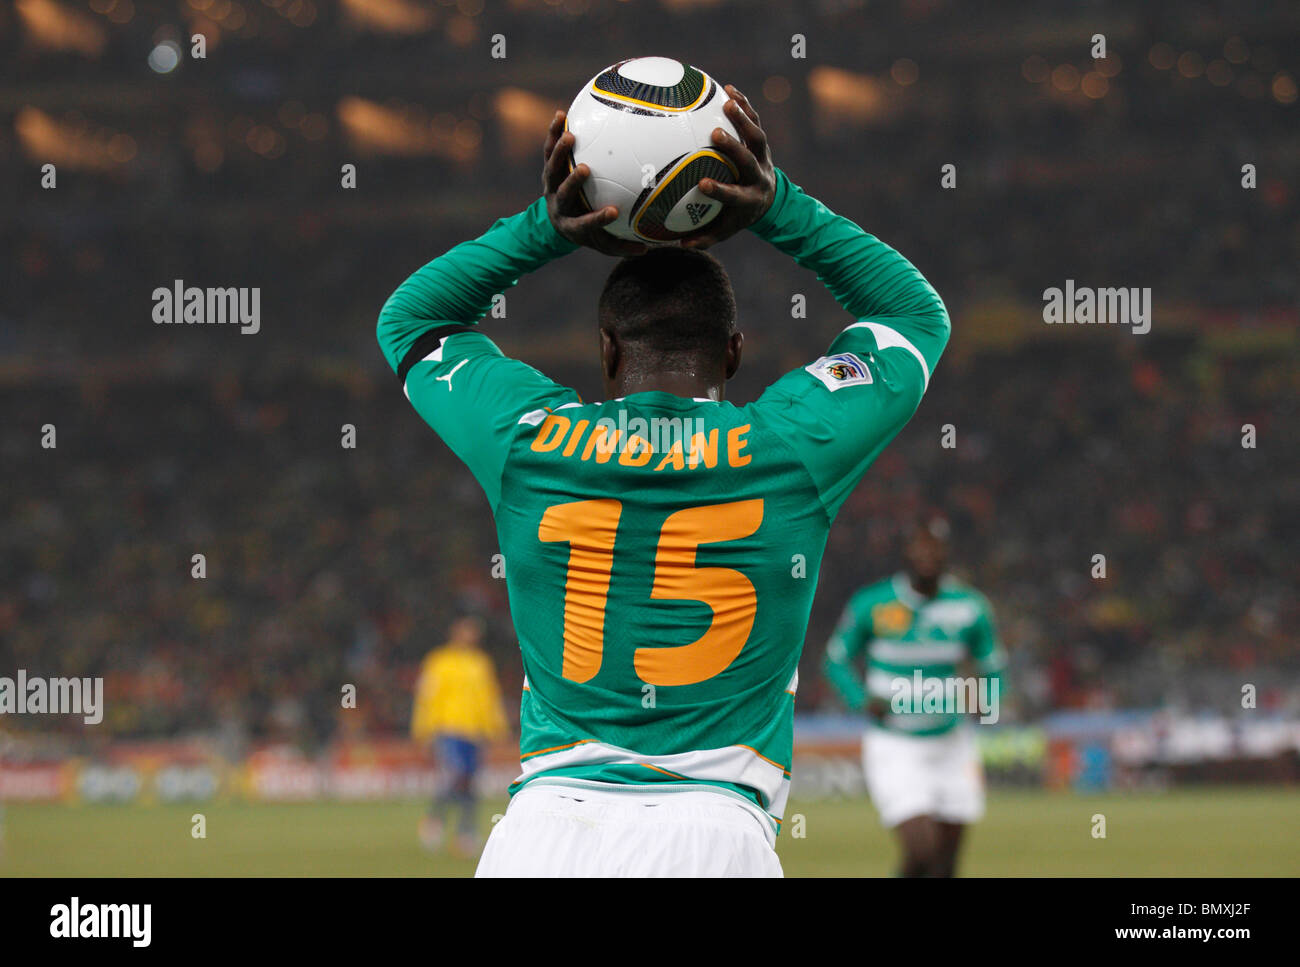 Aruna Dindane of Côte d'Ivoire sets for a throw in during a 2010 FIFA World Cup football match against Brazil June 20, 2010. Stock Photo